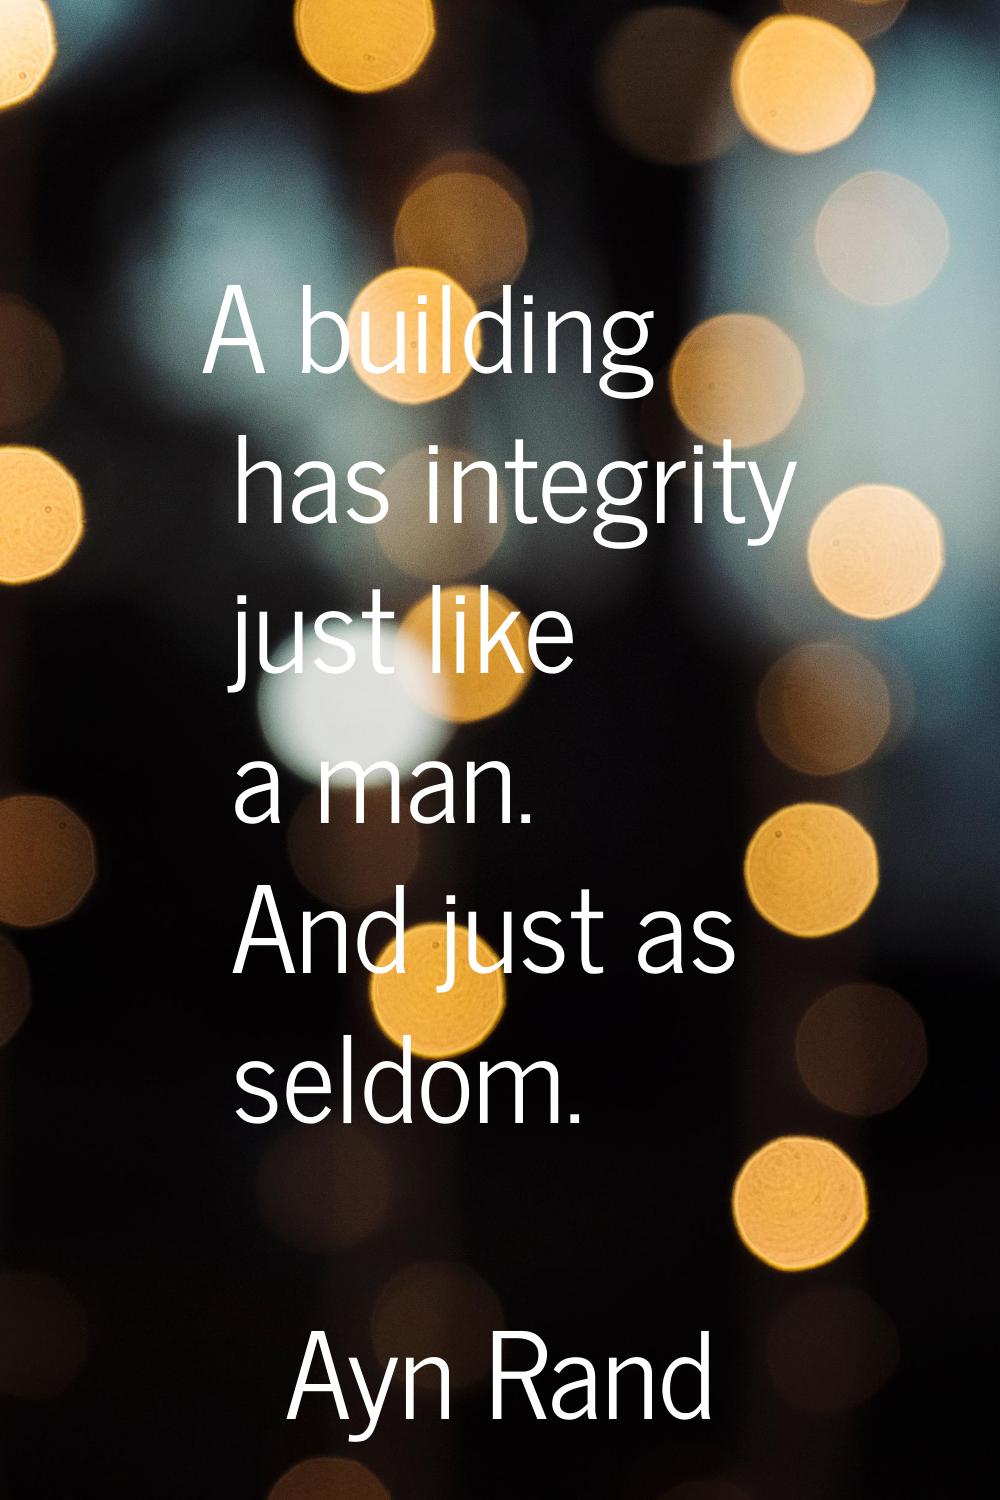 A building has integrity just like a man. And just as seldom.